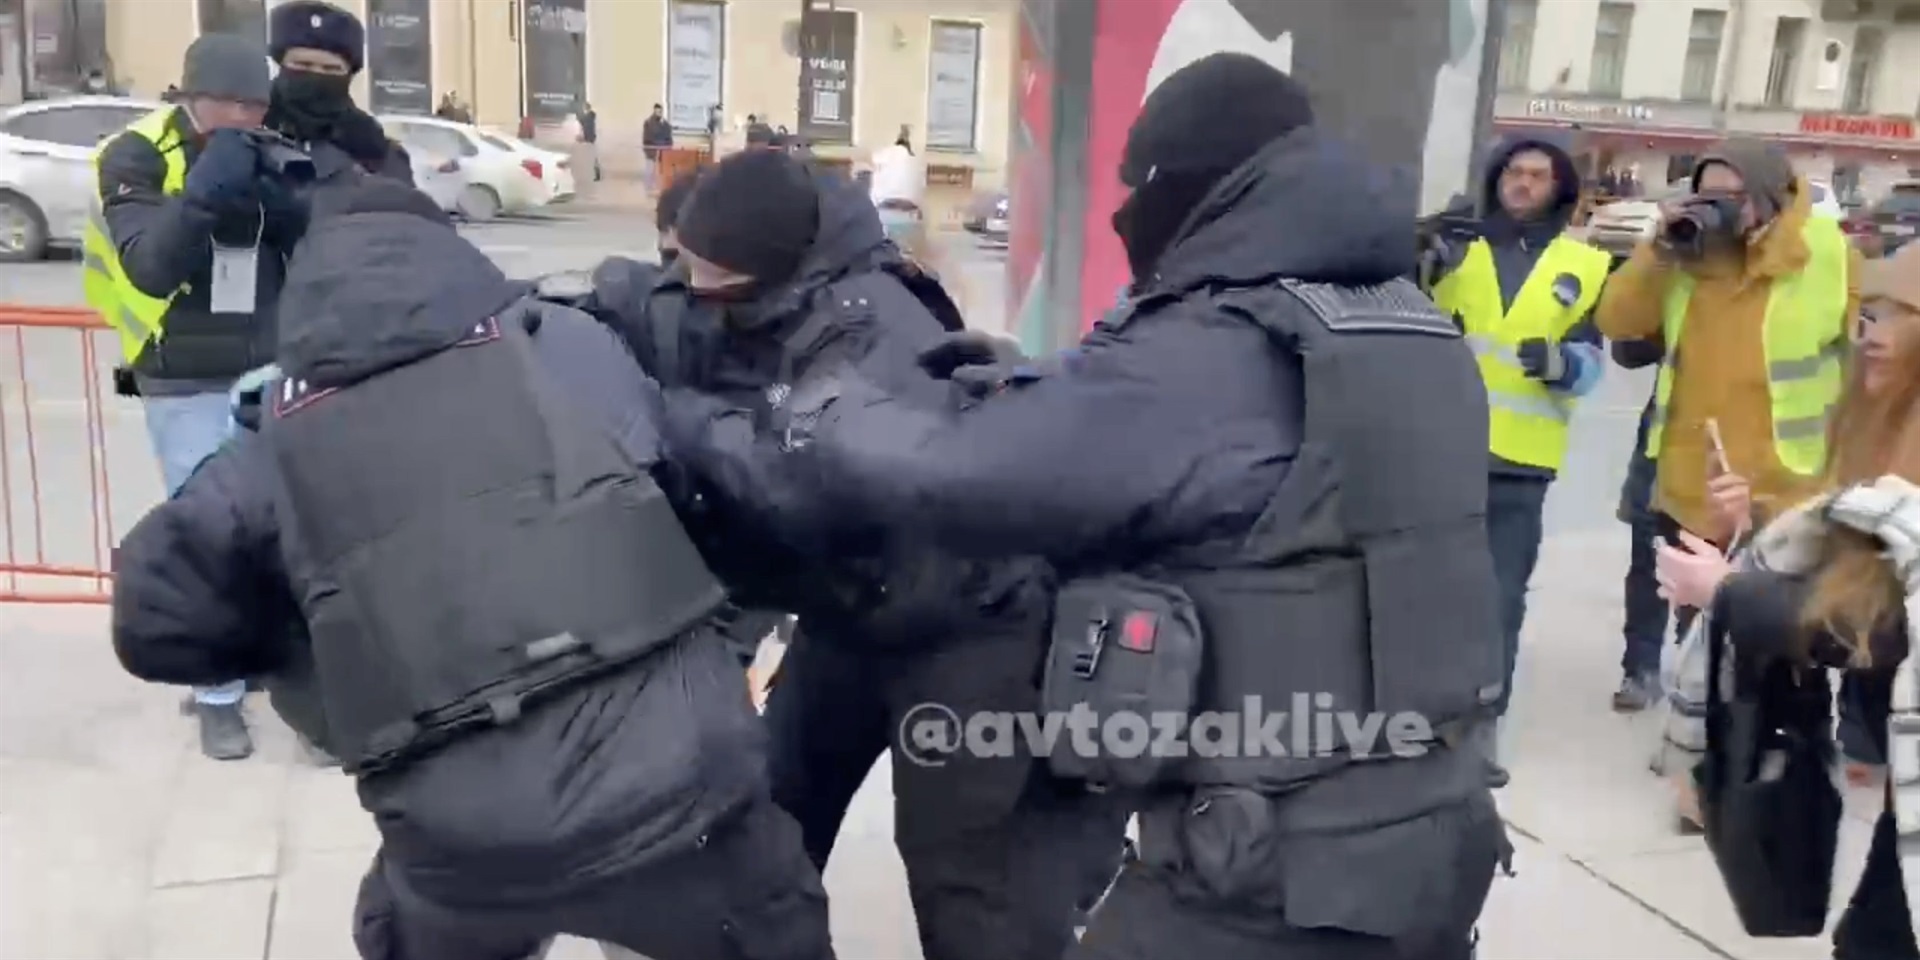 Russian police detain a protester in Saint Petersburg, as seen in a video posted by Avtozak Live on Telegram.